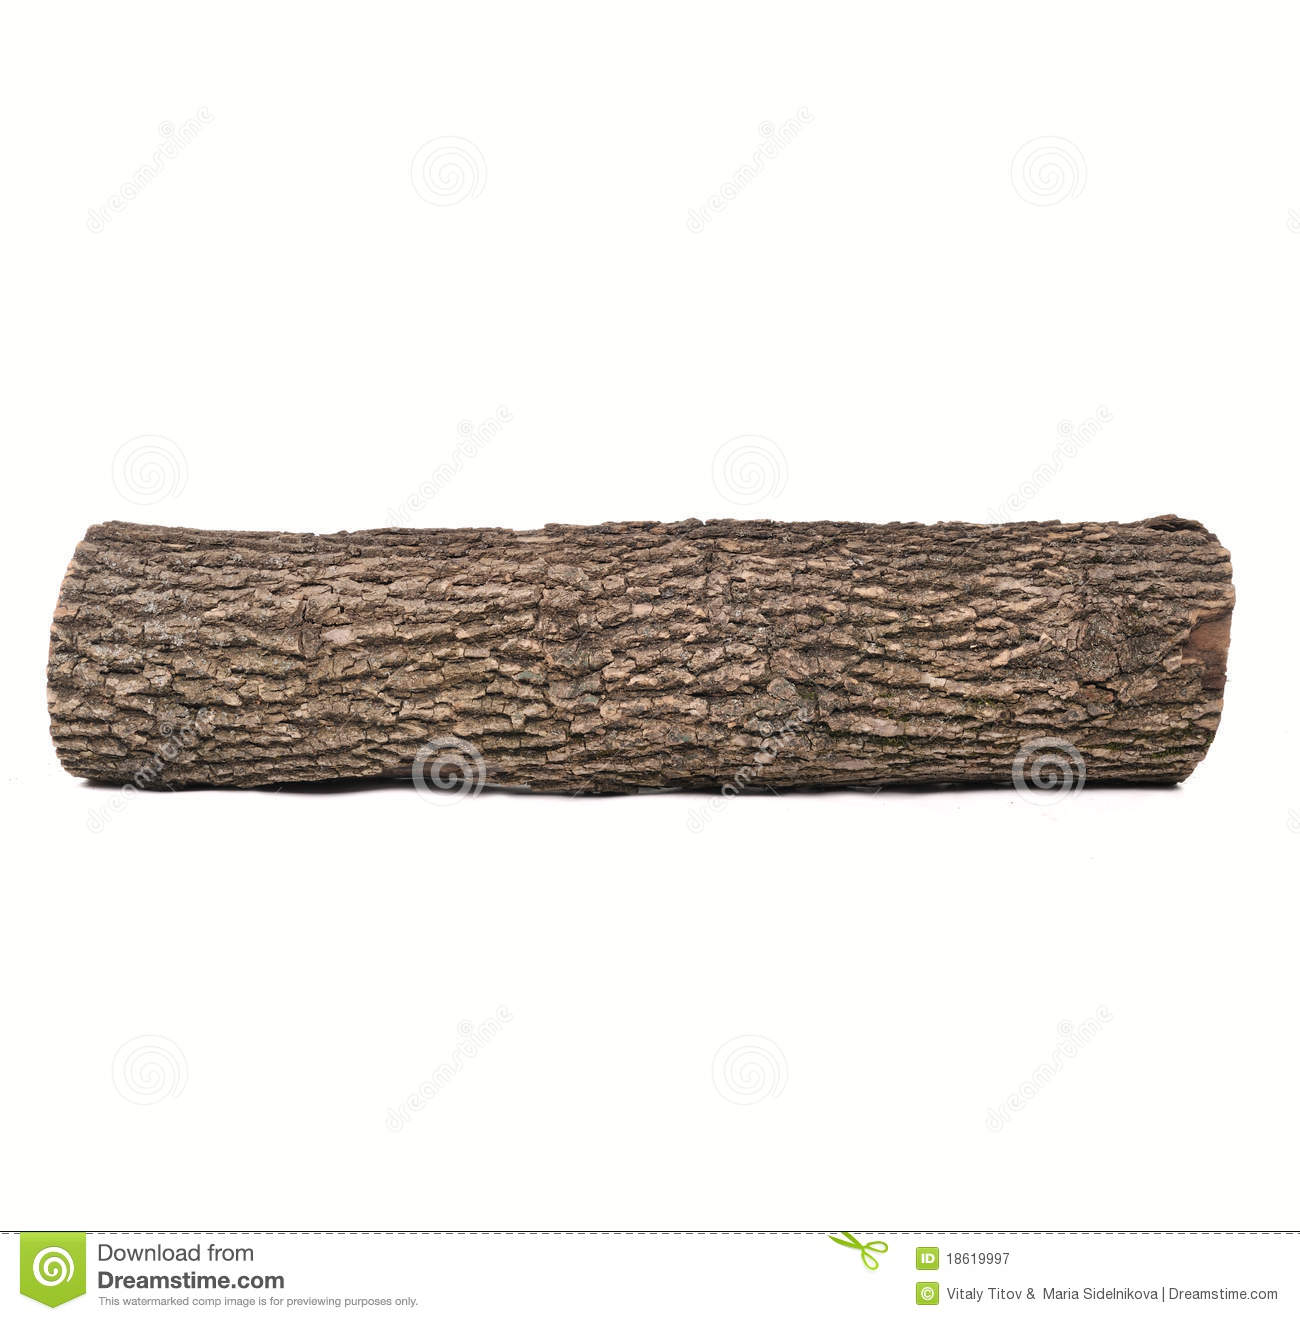     Free Stock Photography  Single Piece Of Dark Wood Isolated On White